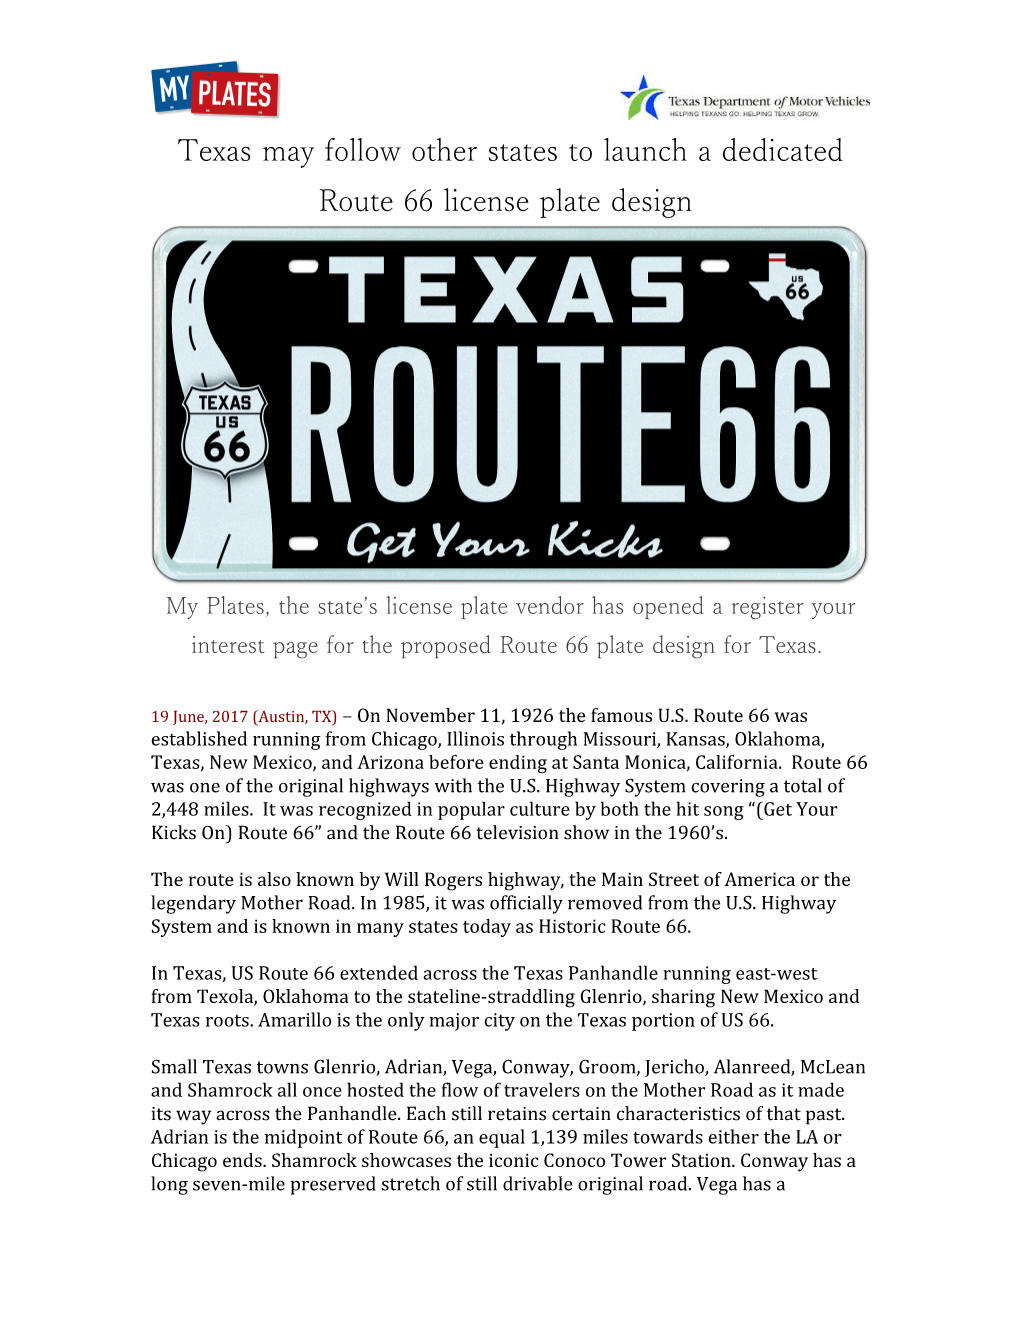 Texas May Follow Other States to Launch a Dedicated Route 66 License Plate Design